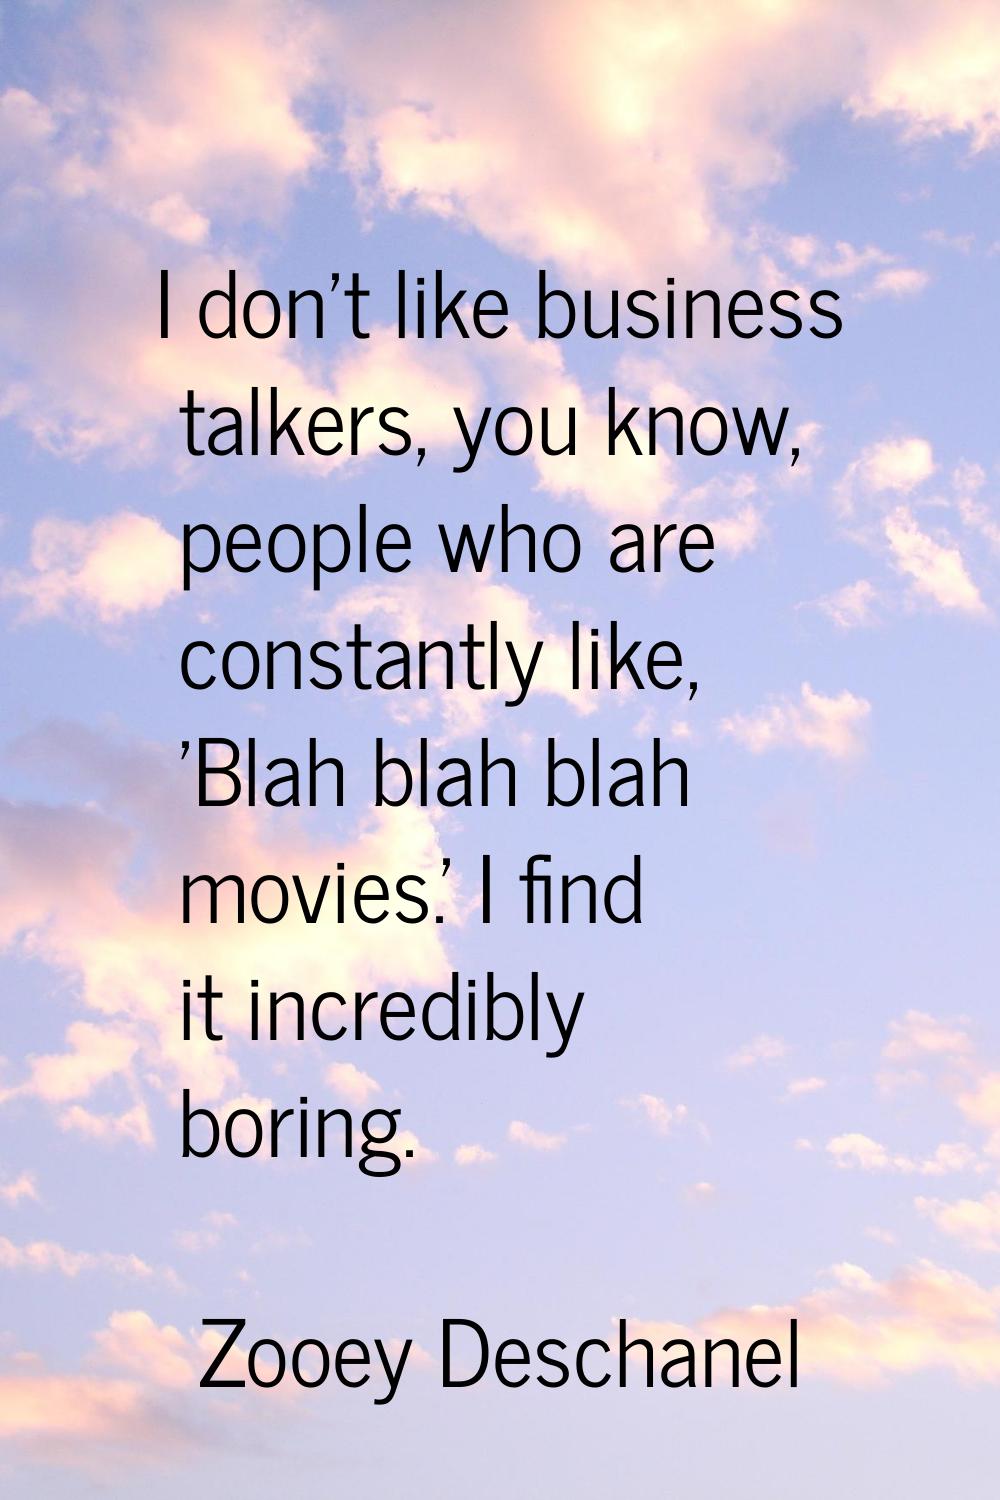 I don't like business talkers, you know, people who are constantly like, 'Blah blah blah movies.' I